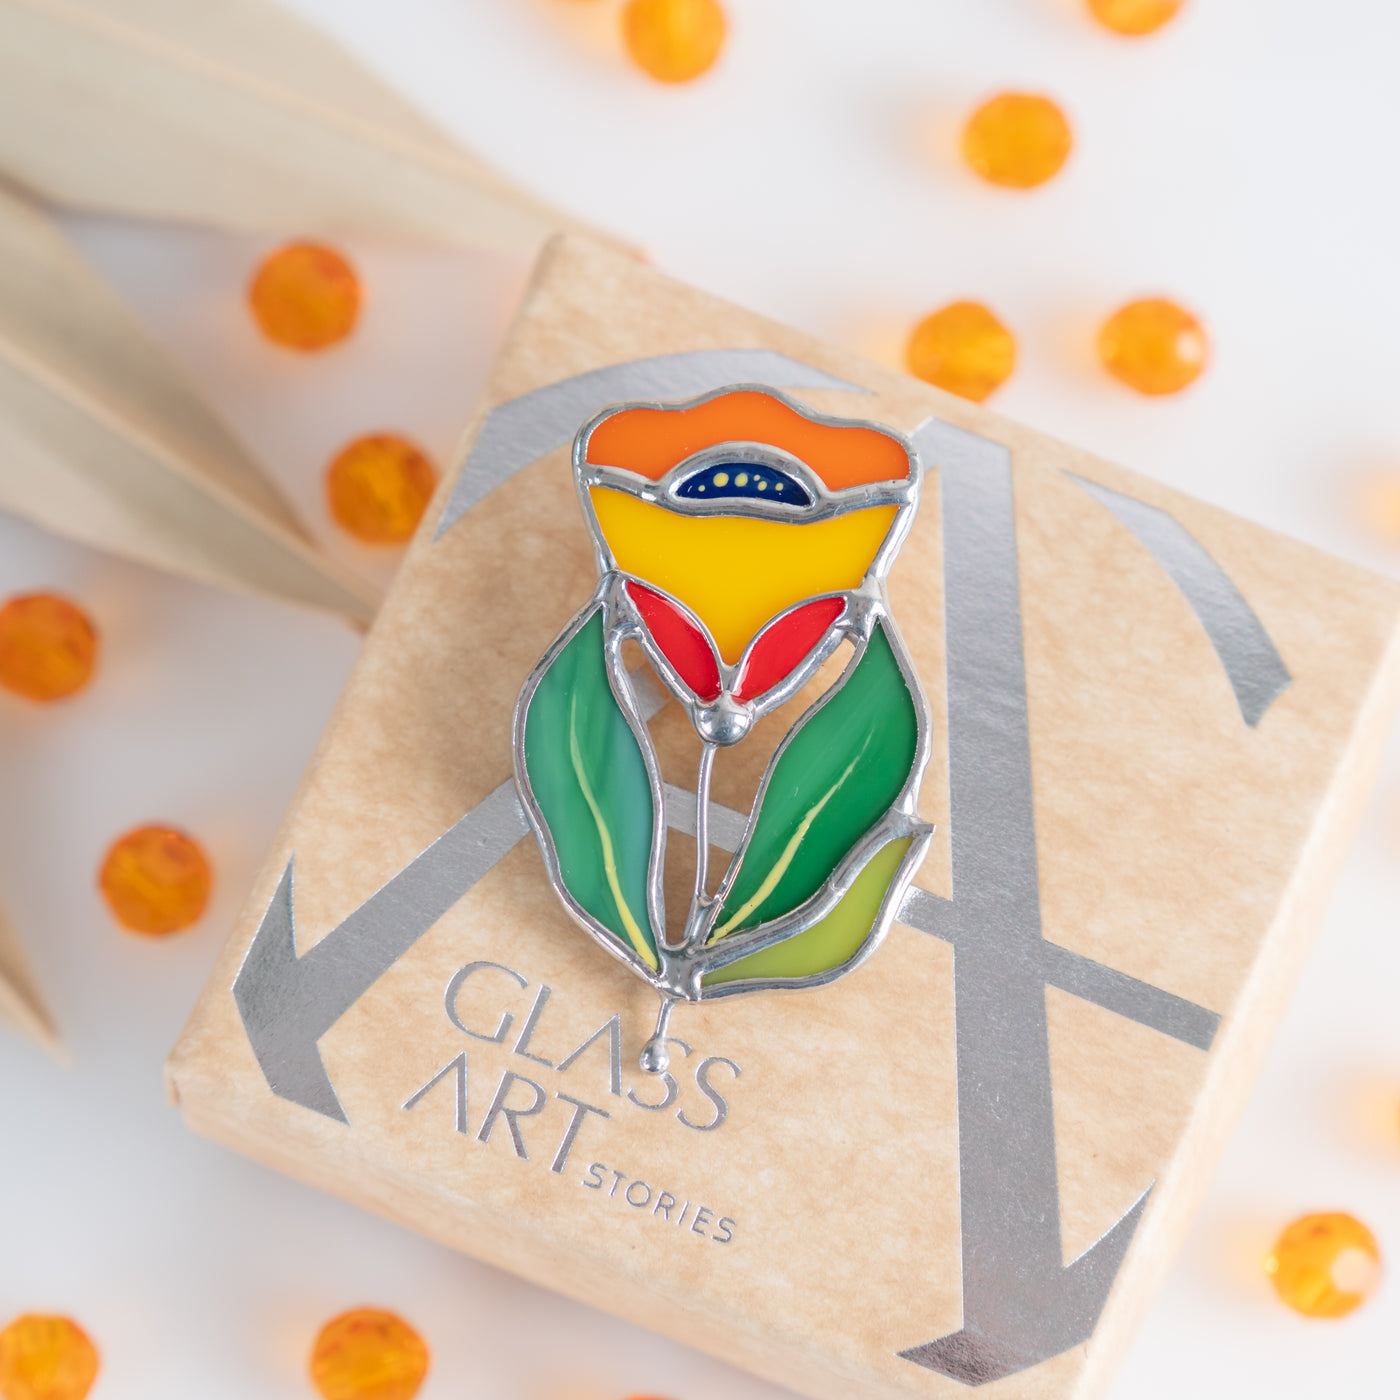 Stained glass zinnia flower brooch on a brand box